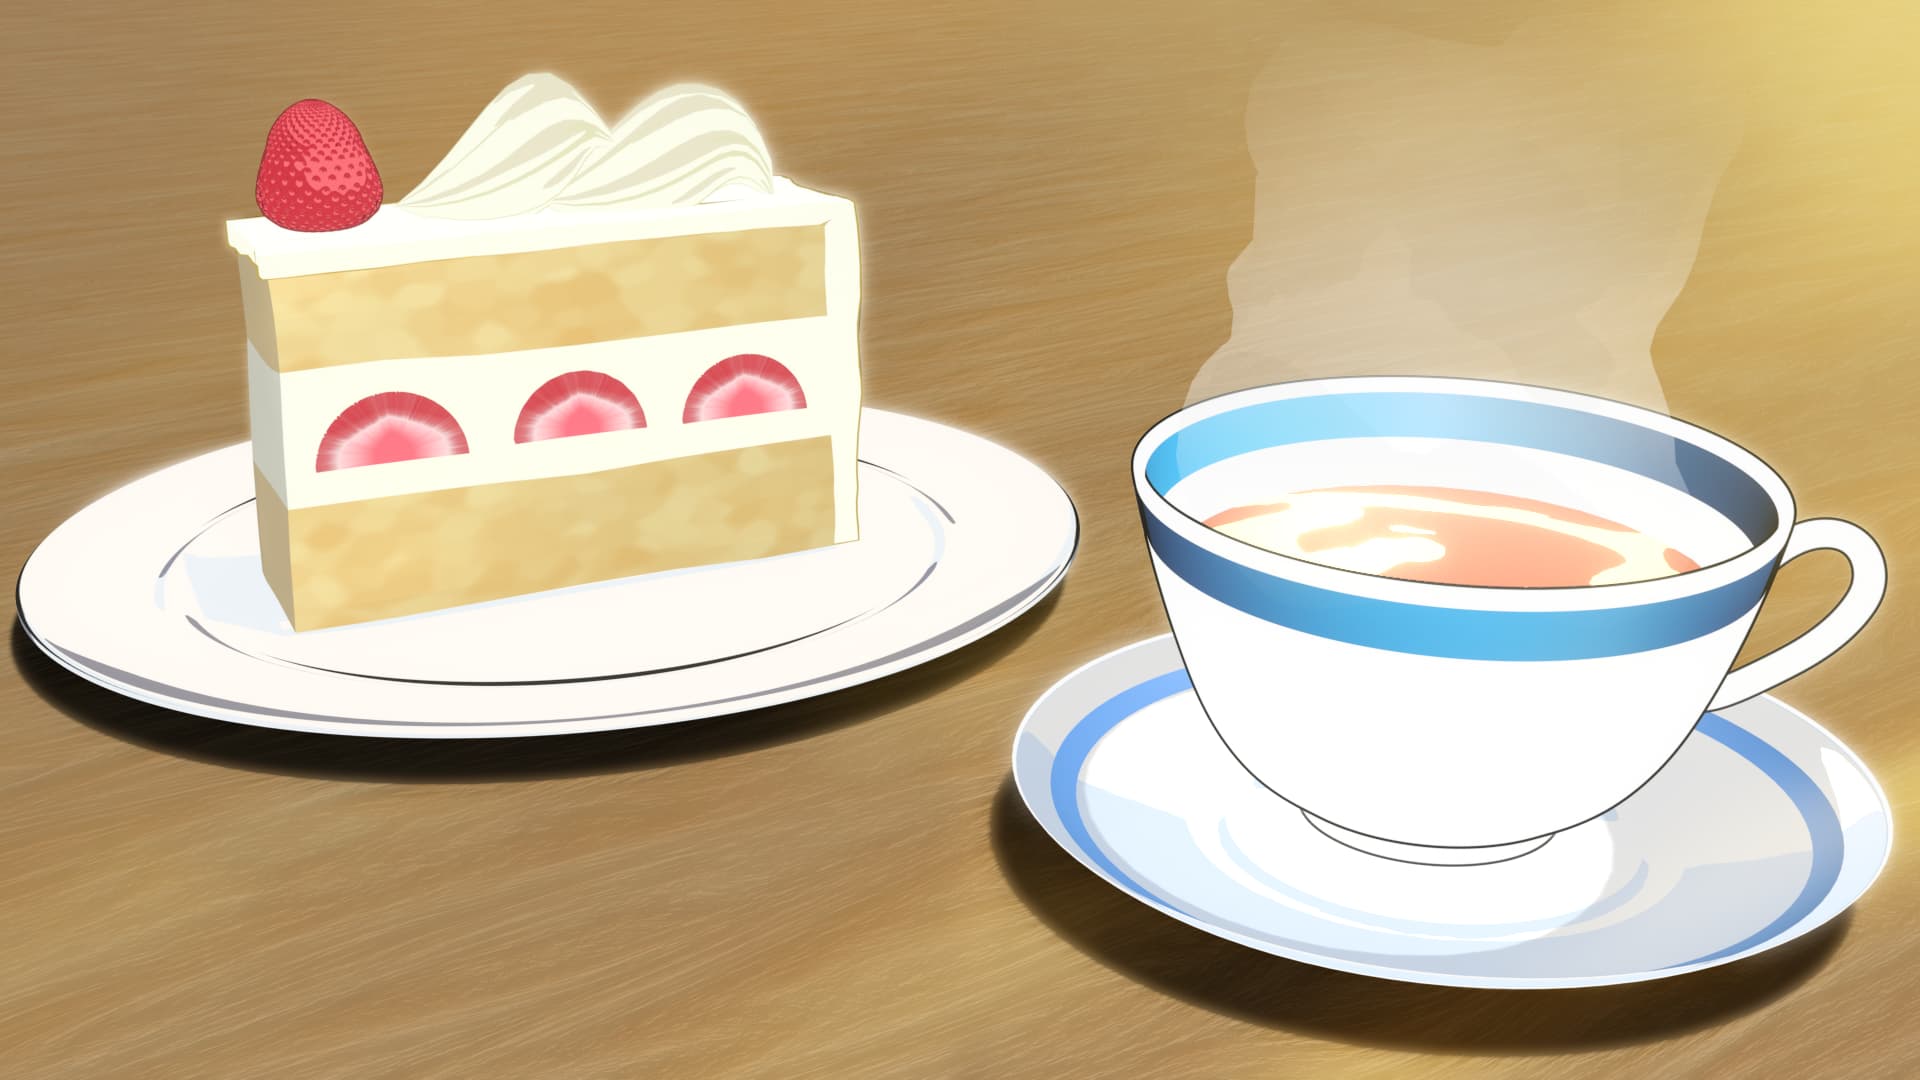 Anime tea - Toon Eevee - Finished Projects - Blender Artists Community